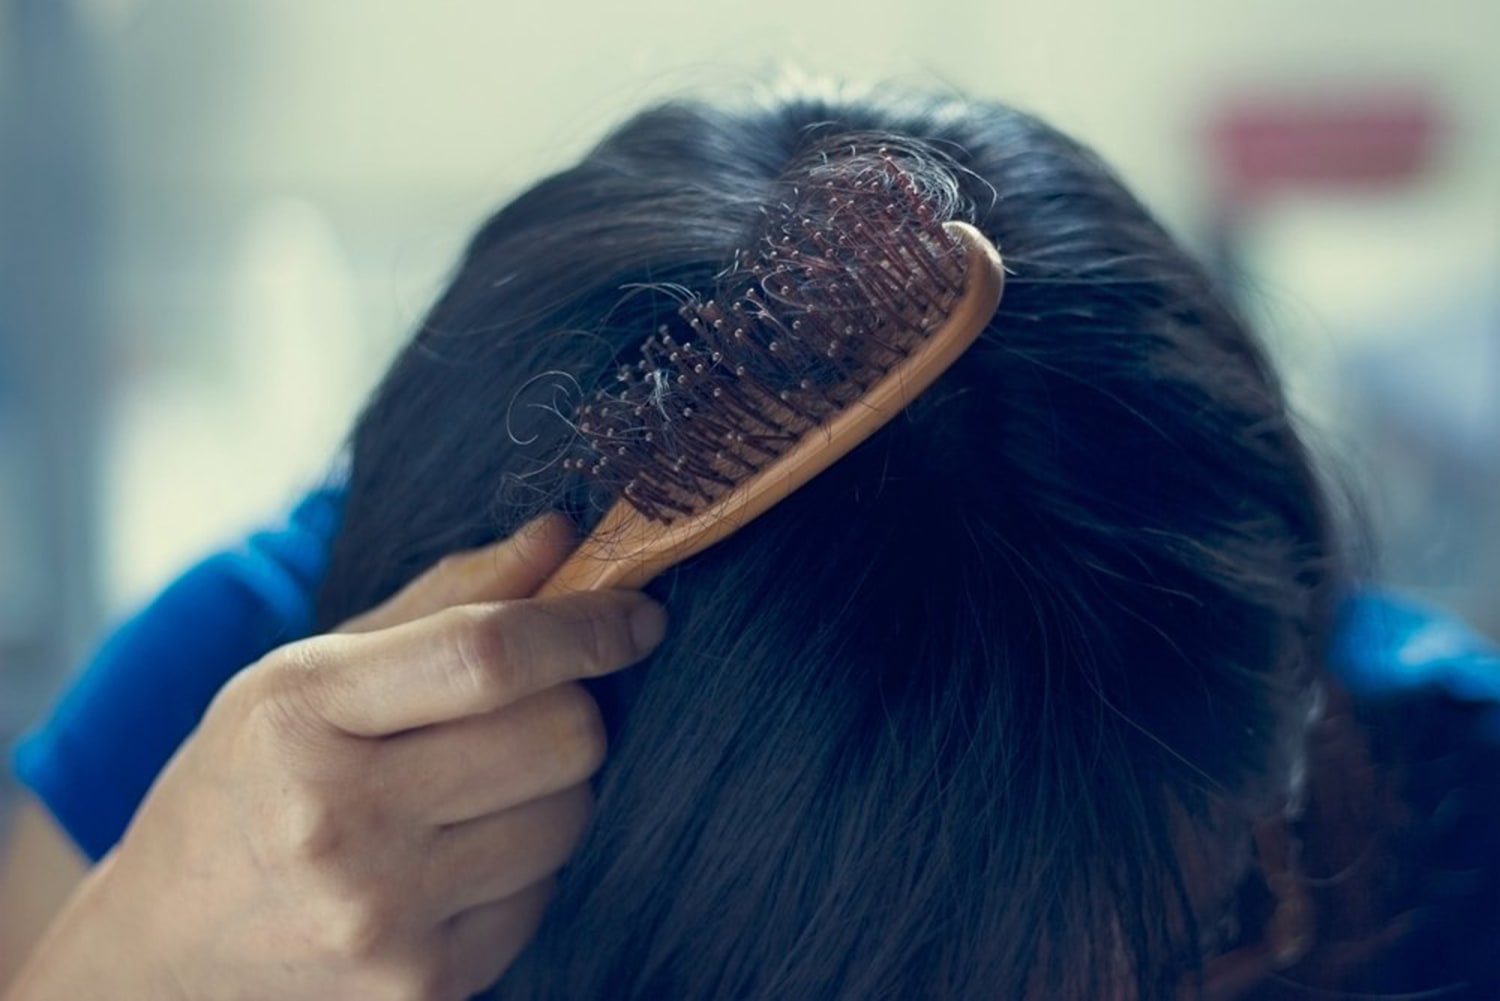 Female Hair Loss | Learn What Steps You Need To Take Next